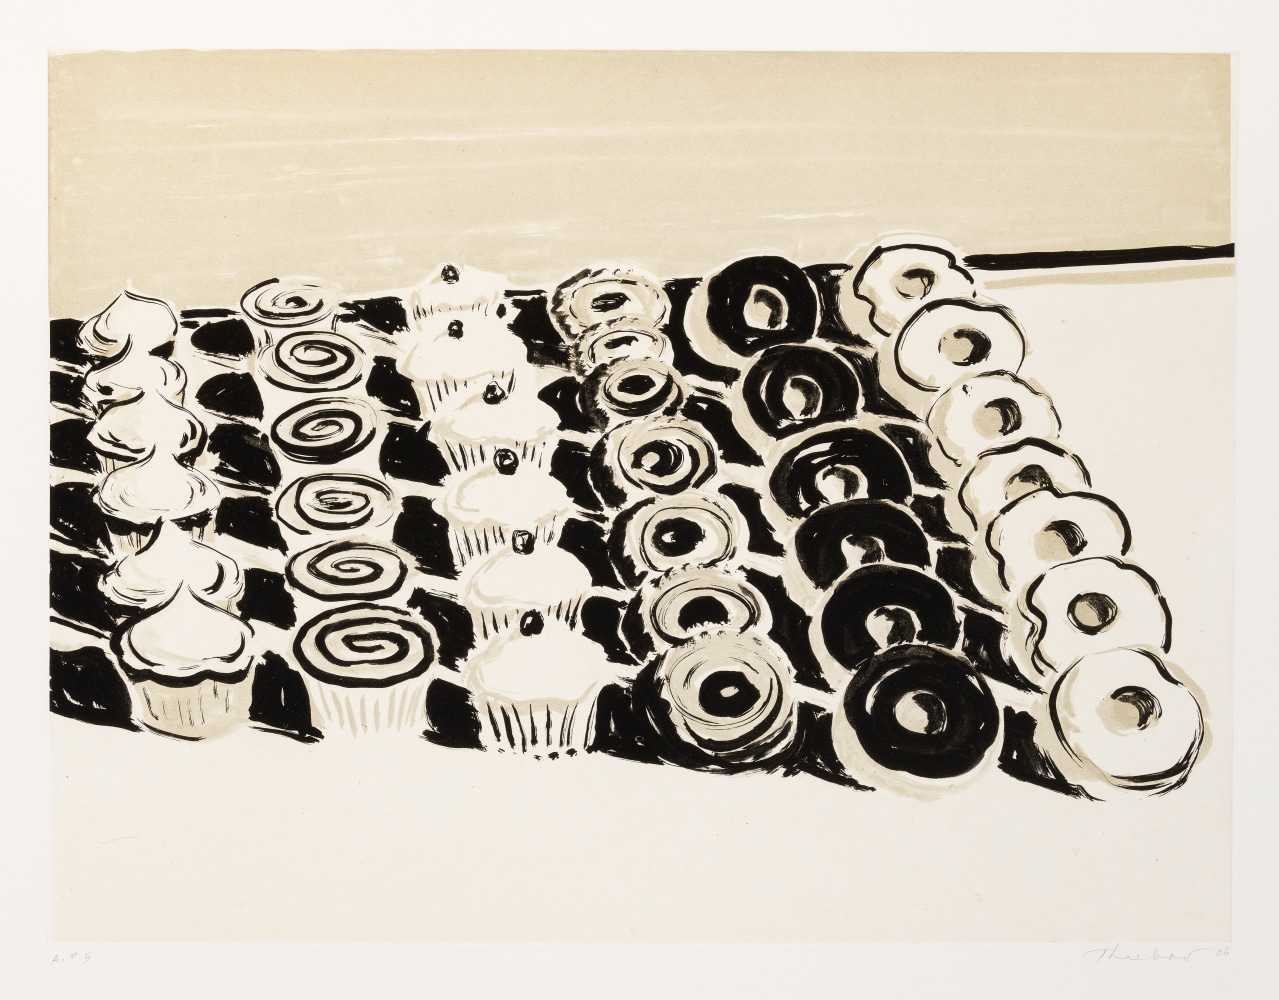 Wayne Thiebaud Dark Cupcakes and Donuts, 2006 direct gravure on gampi paper chine collé, A.P. 4 18 x 24 in. [image]; 26 x 31 in. [sheet]